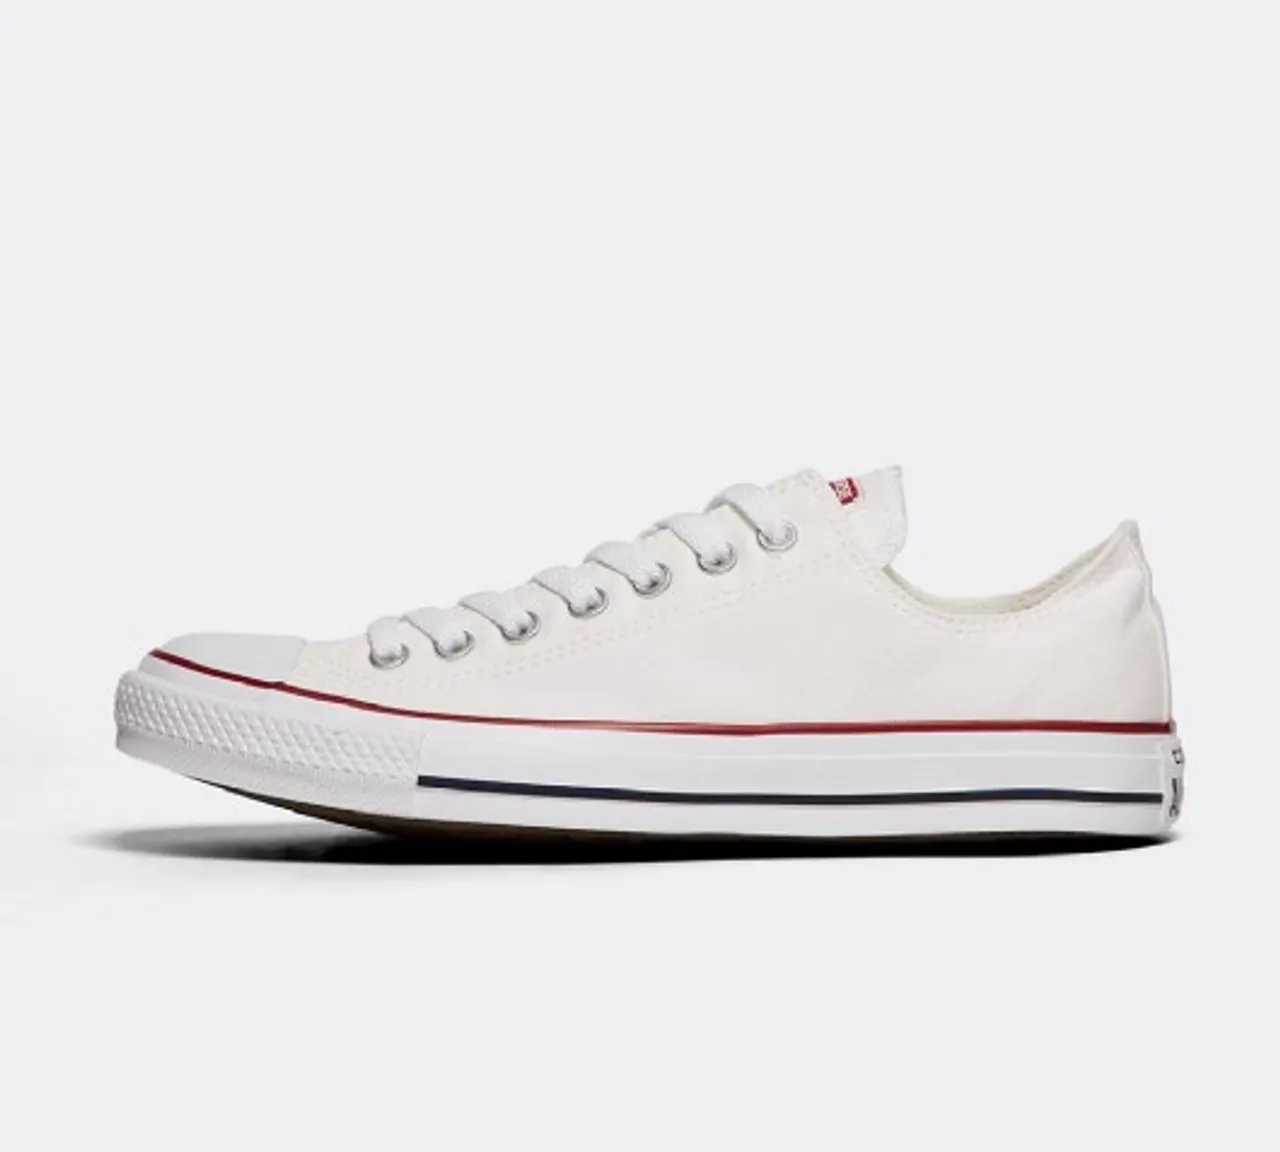 Chuck Taylor All Star Ox Trainer